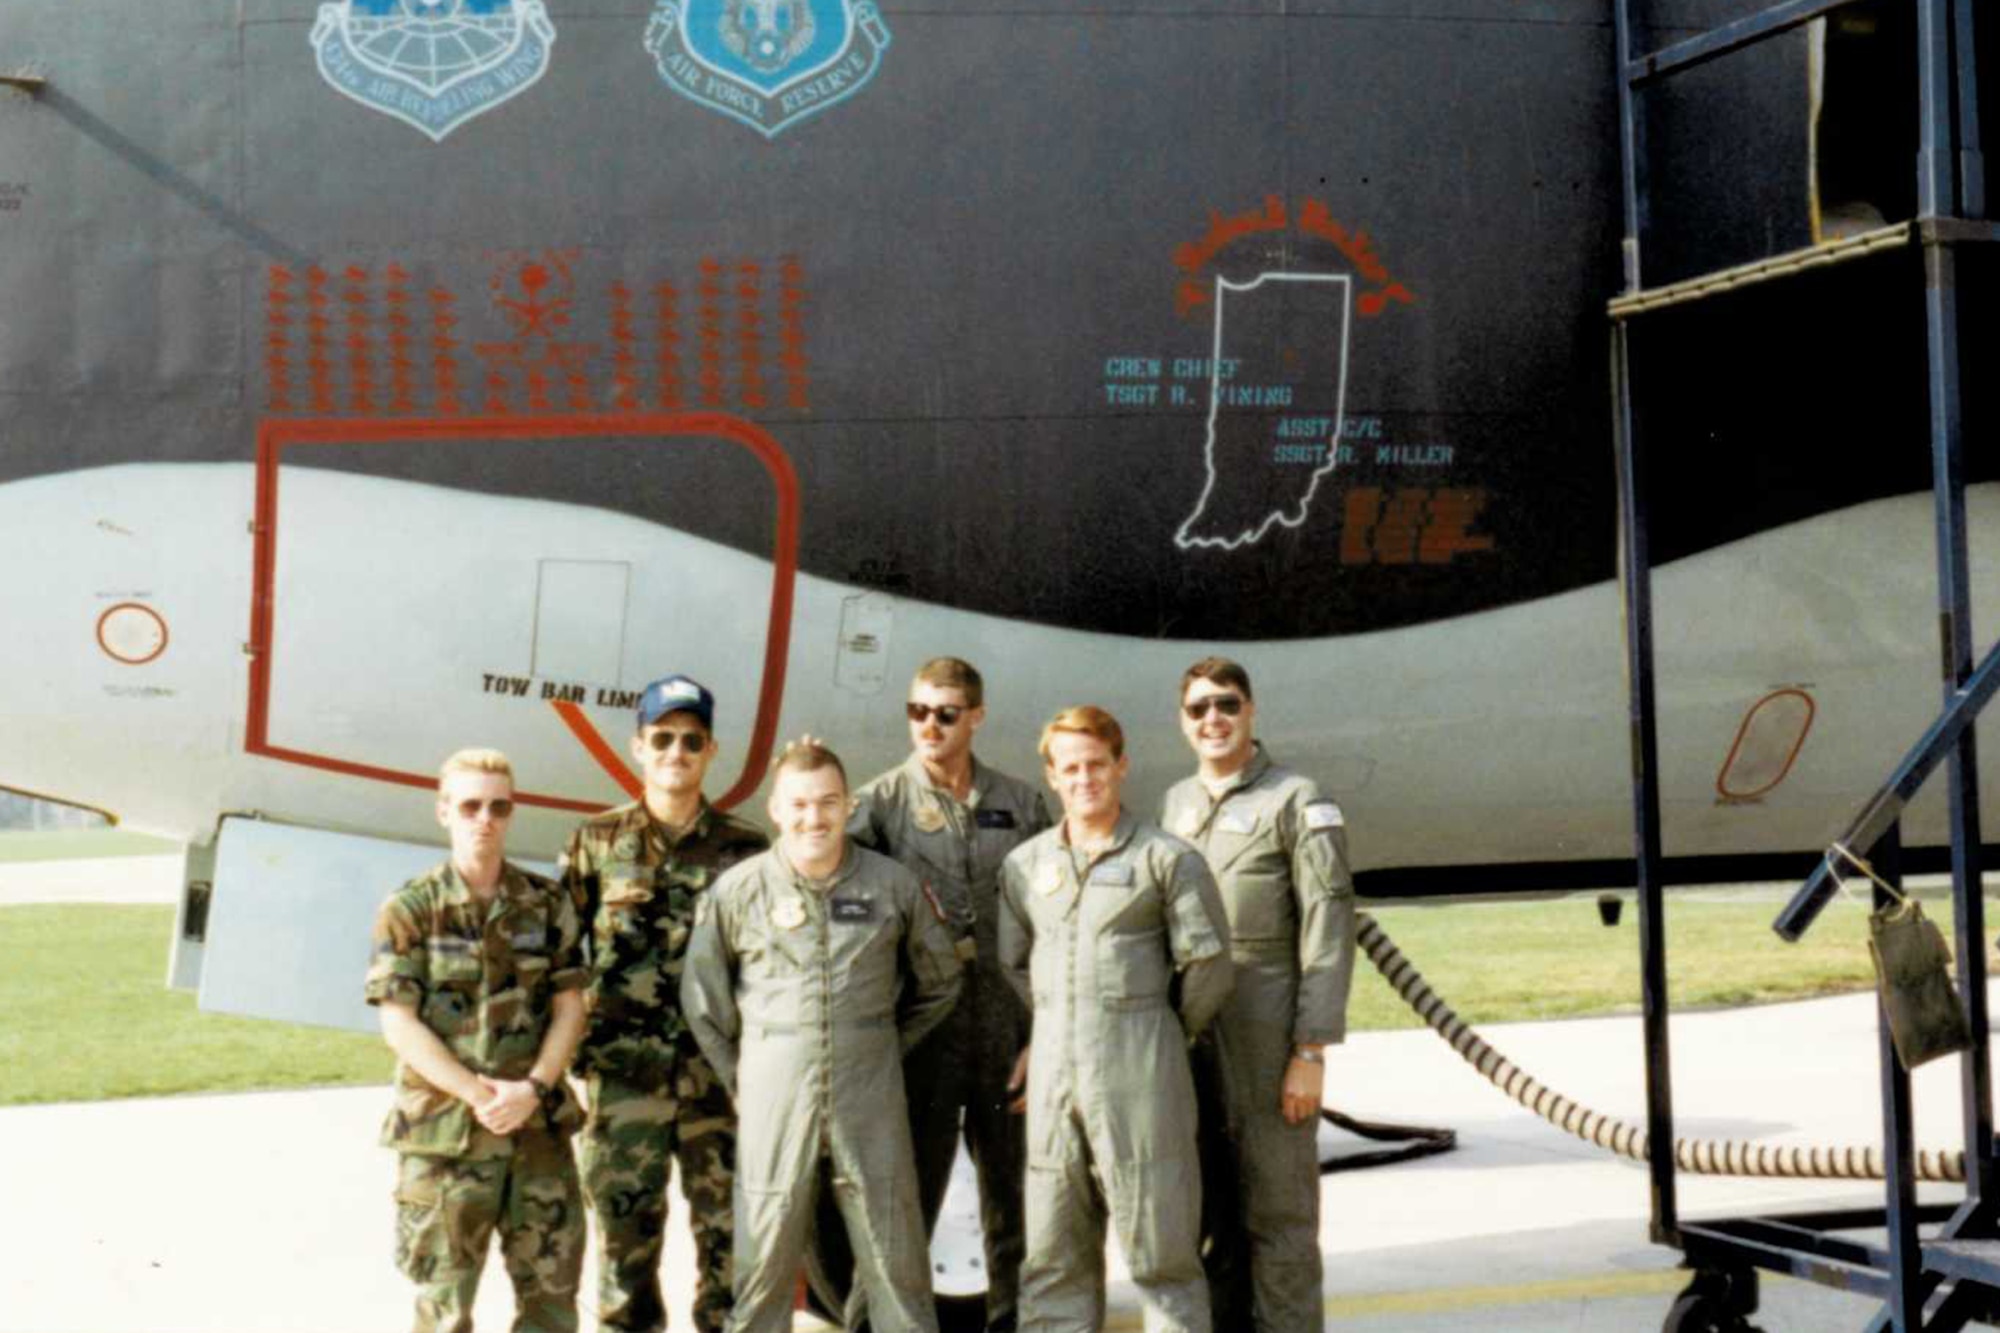 434th Air Refueling Wing Airmen pose next to a KC-135 at Mildenhall AFB, United Kingdom. From the left is Sean Mahoney, Rich Miller, Chris Scher,  Rusty Owen and Mark Cole. (U.S. Air Force courtesy photo/Senior Master Sgt. Rich Miller)